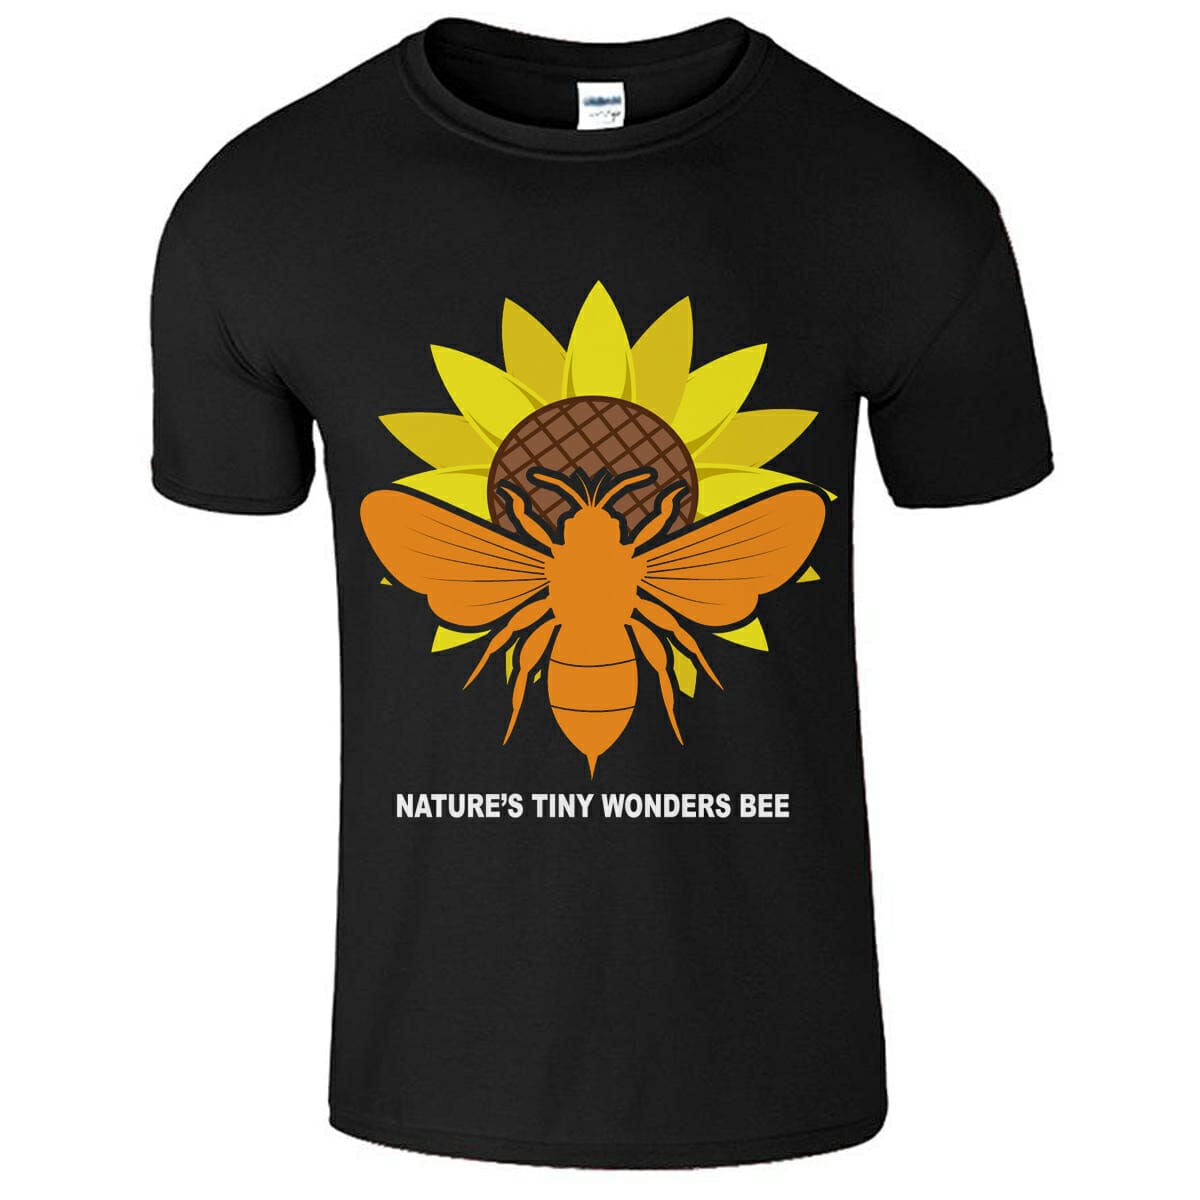 Natures Tiny Wonders Bee - T-Shirt Design For Free